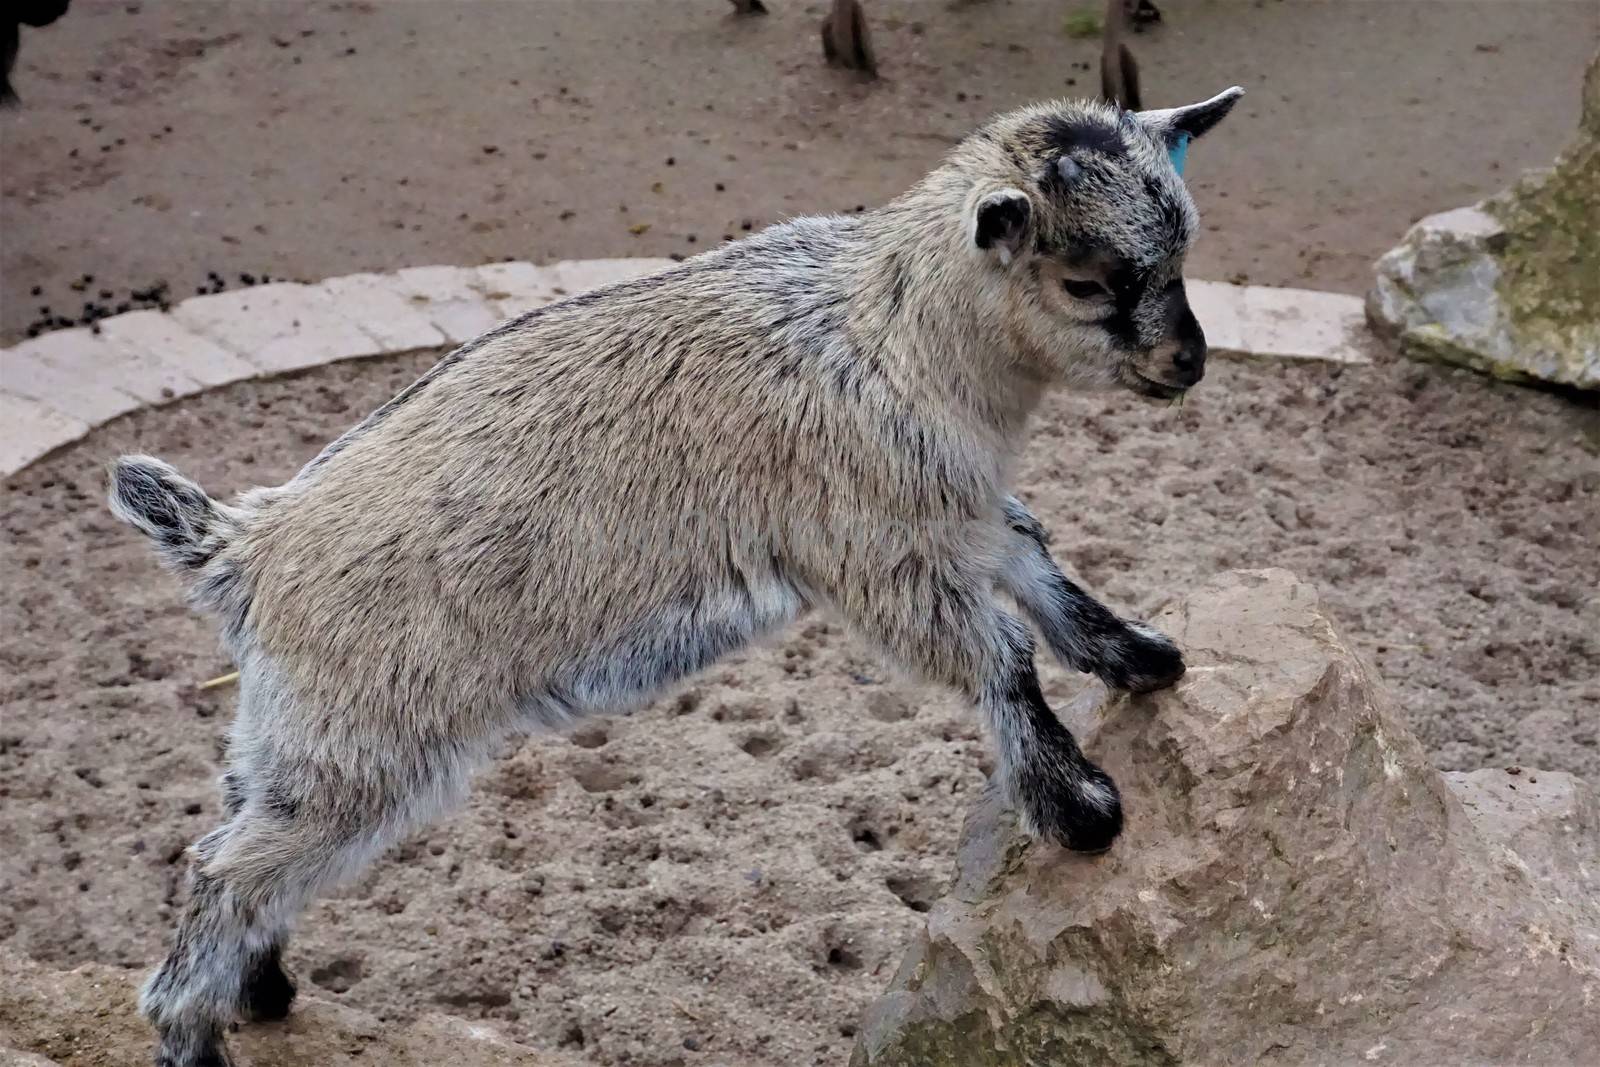 A little baby goat standing on a rock